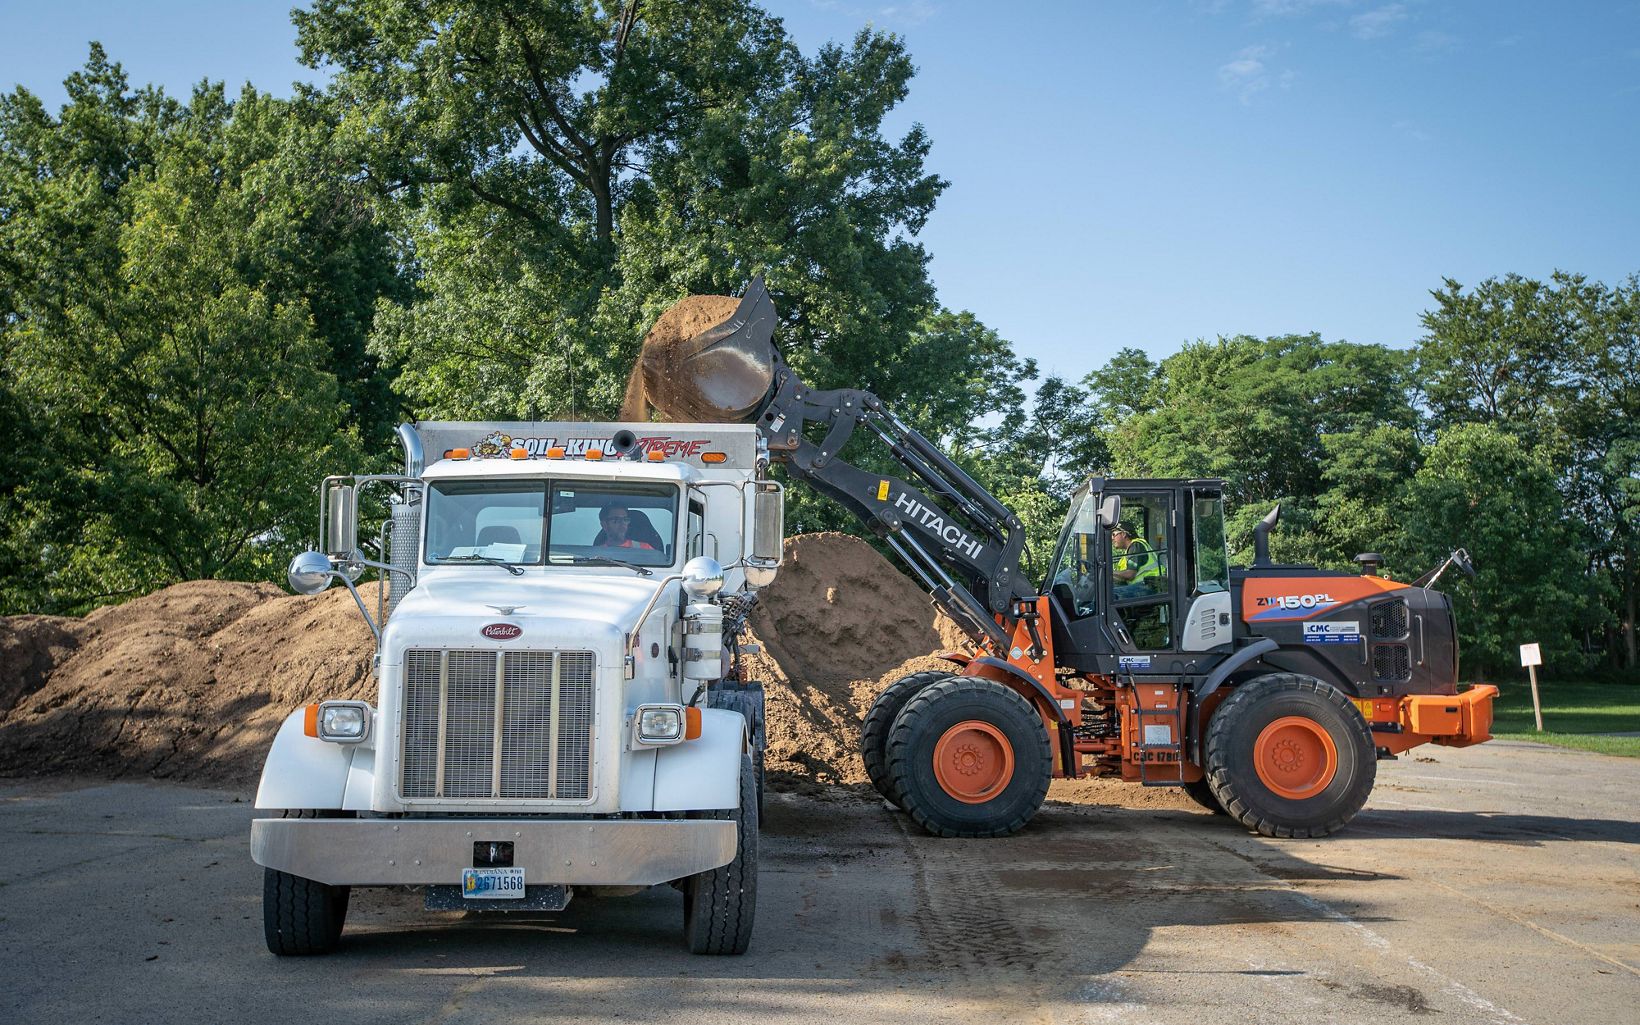 Transporting Soil Soil is loaded into a truck for placement in the Green Heart project's planting areas on a Louisville highway. © Mike Wilkinson